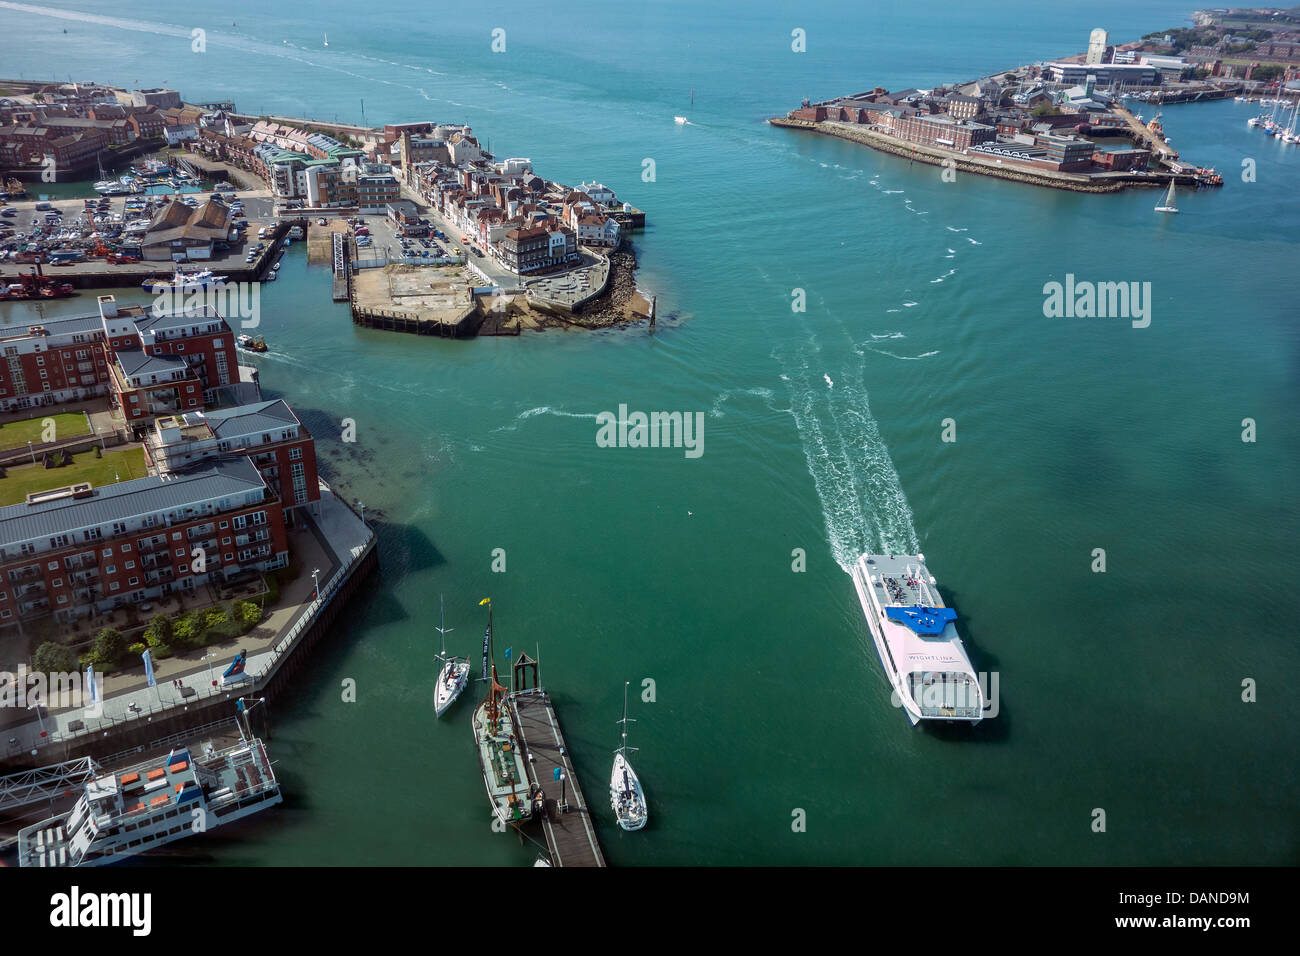 Portsmouth Harbour from the Spinnaker Tower Viewing Window. A Wightlink Ferry has just entered the harbour. Stock Photo